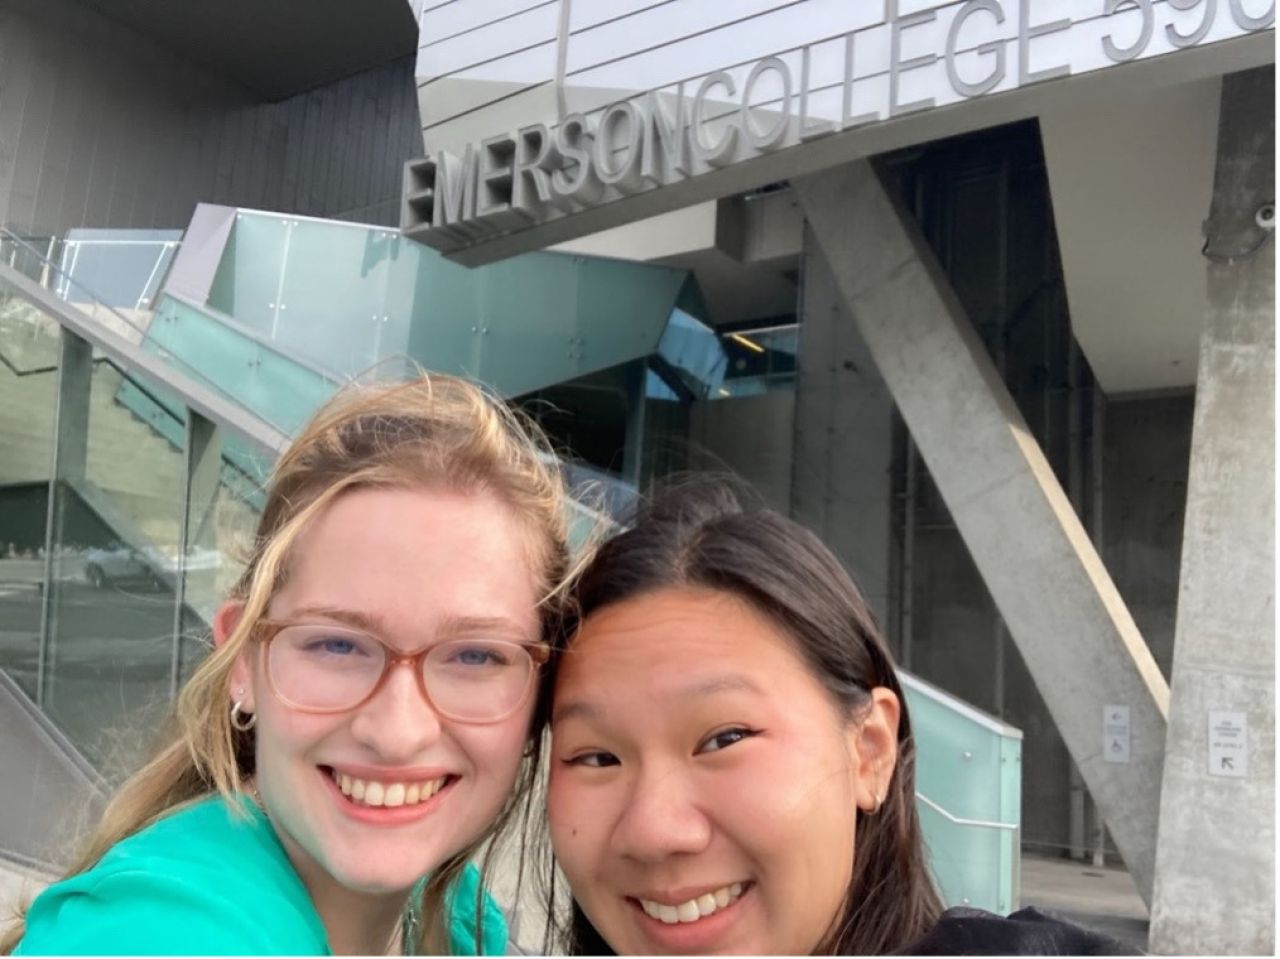 selfie photo of two women from chin up inside a building with a sign "Emerson College"